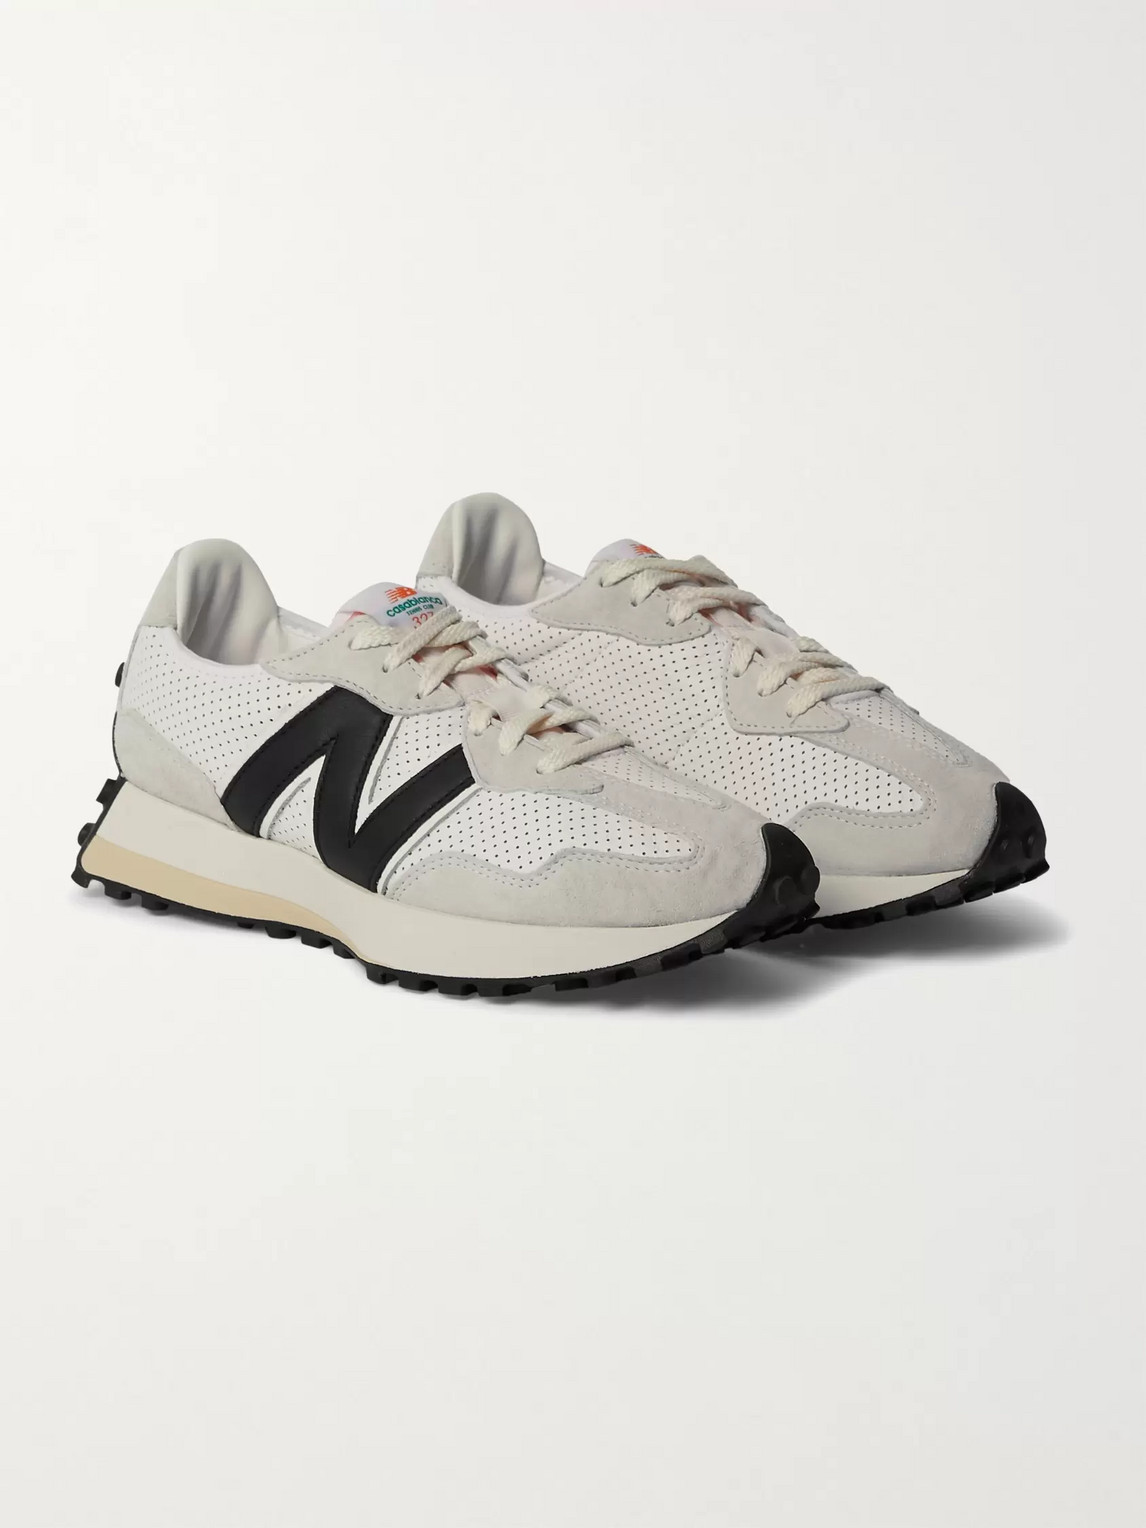 NEW BALANCE CASABLANCA 327 SUEDE-TRIMMED PERFORATED LEATHER SNEAKERS